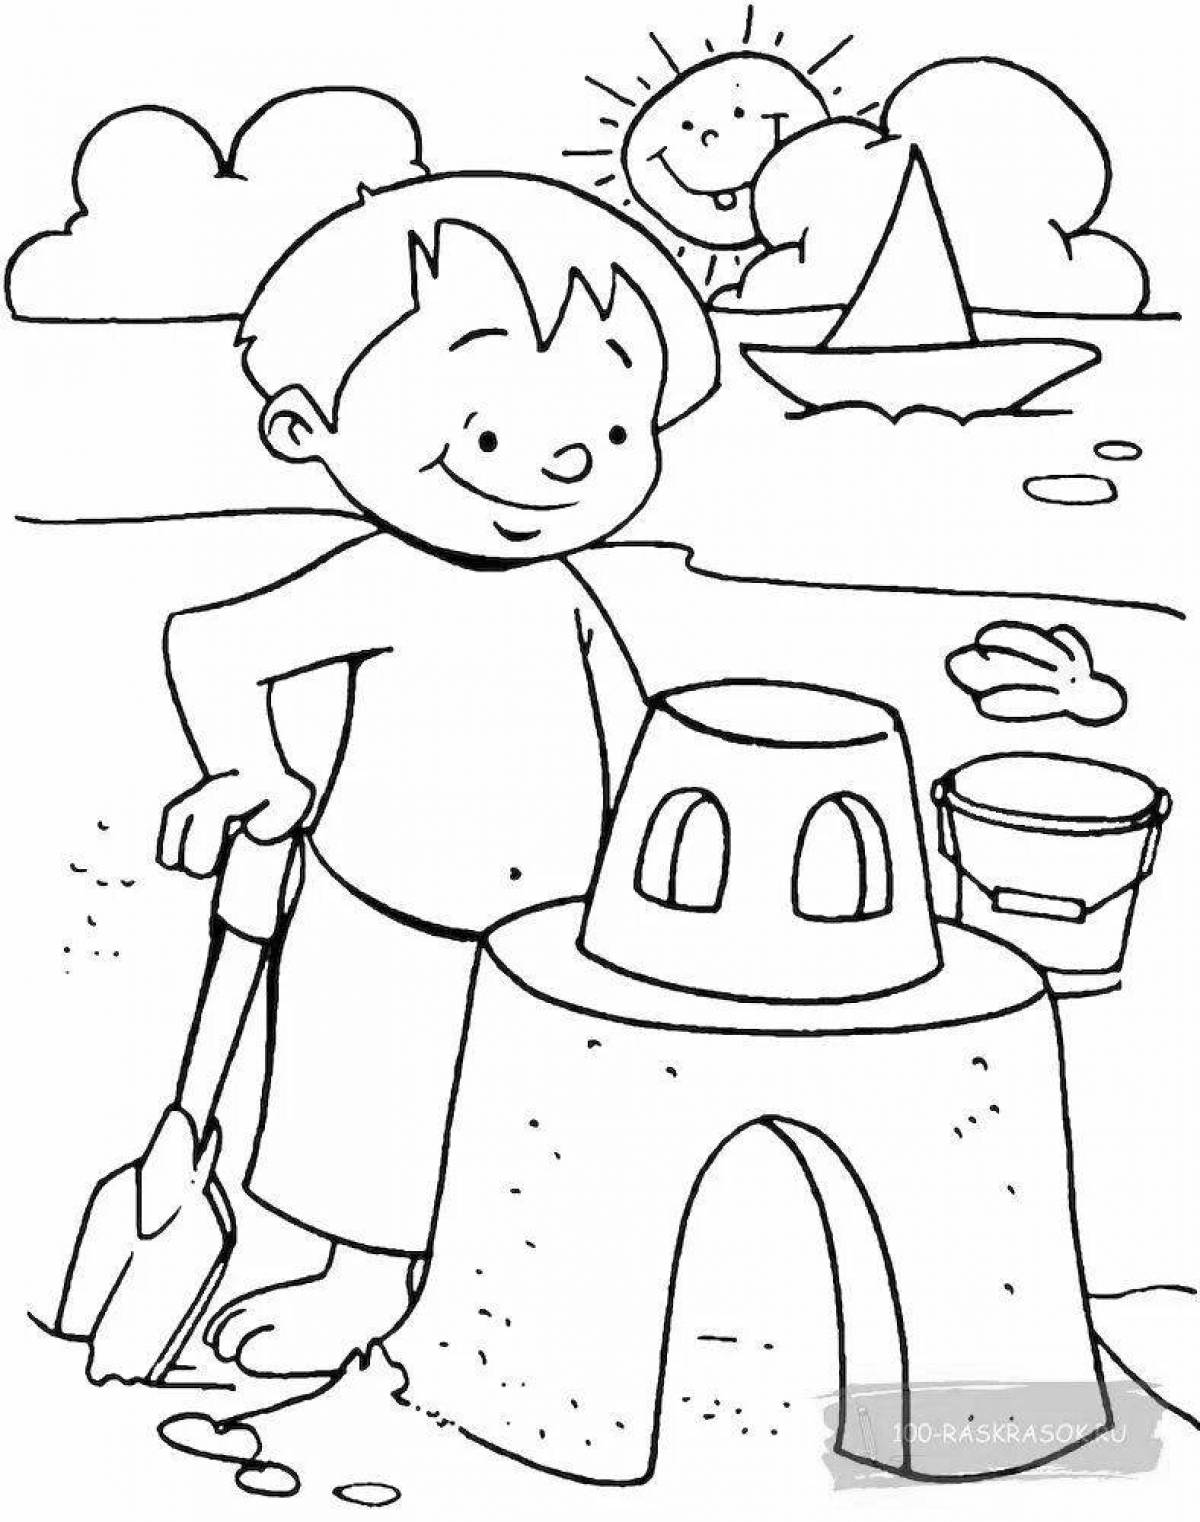 Sweet summer coloring page